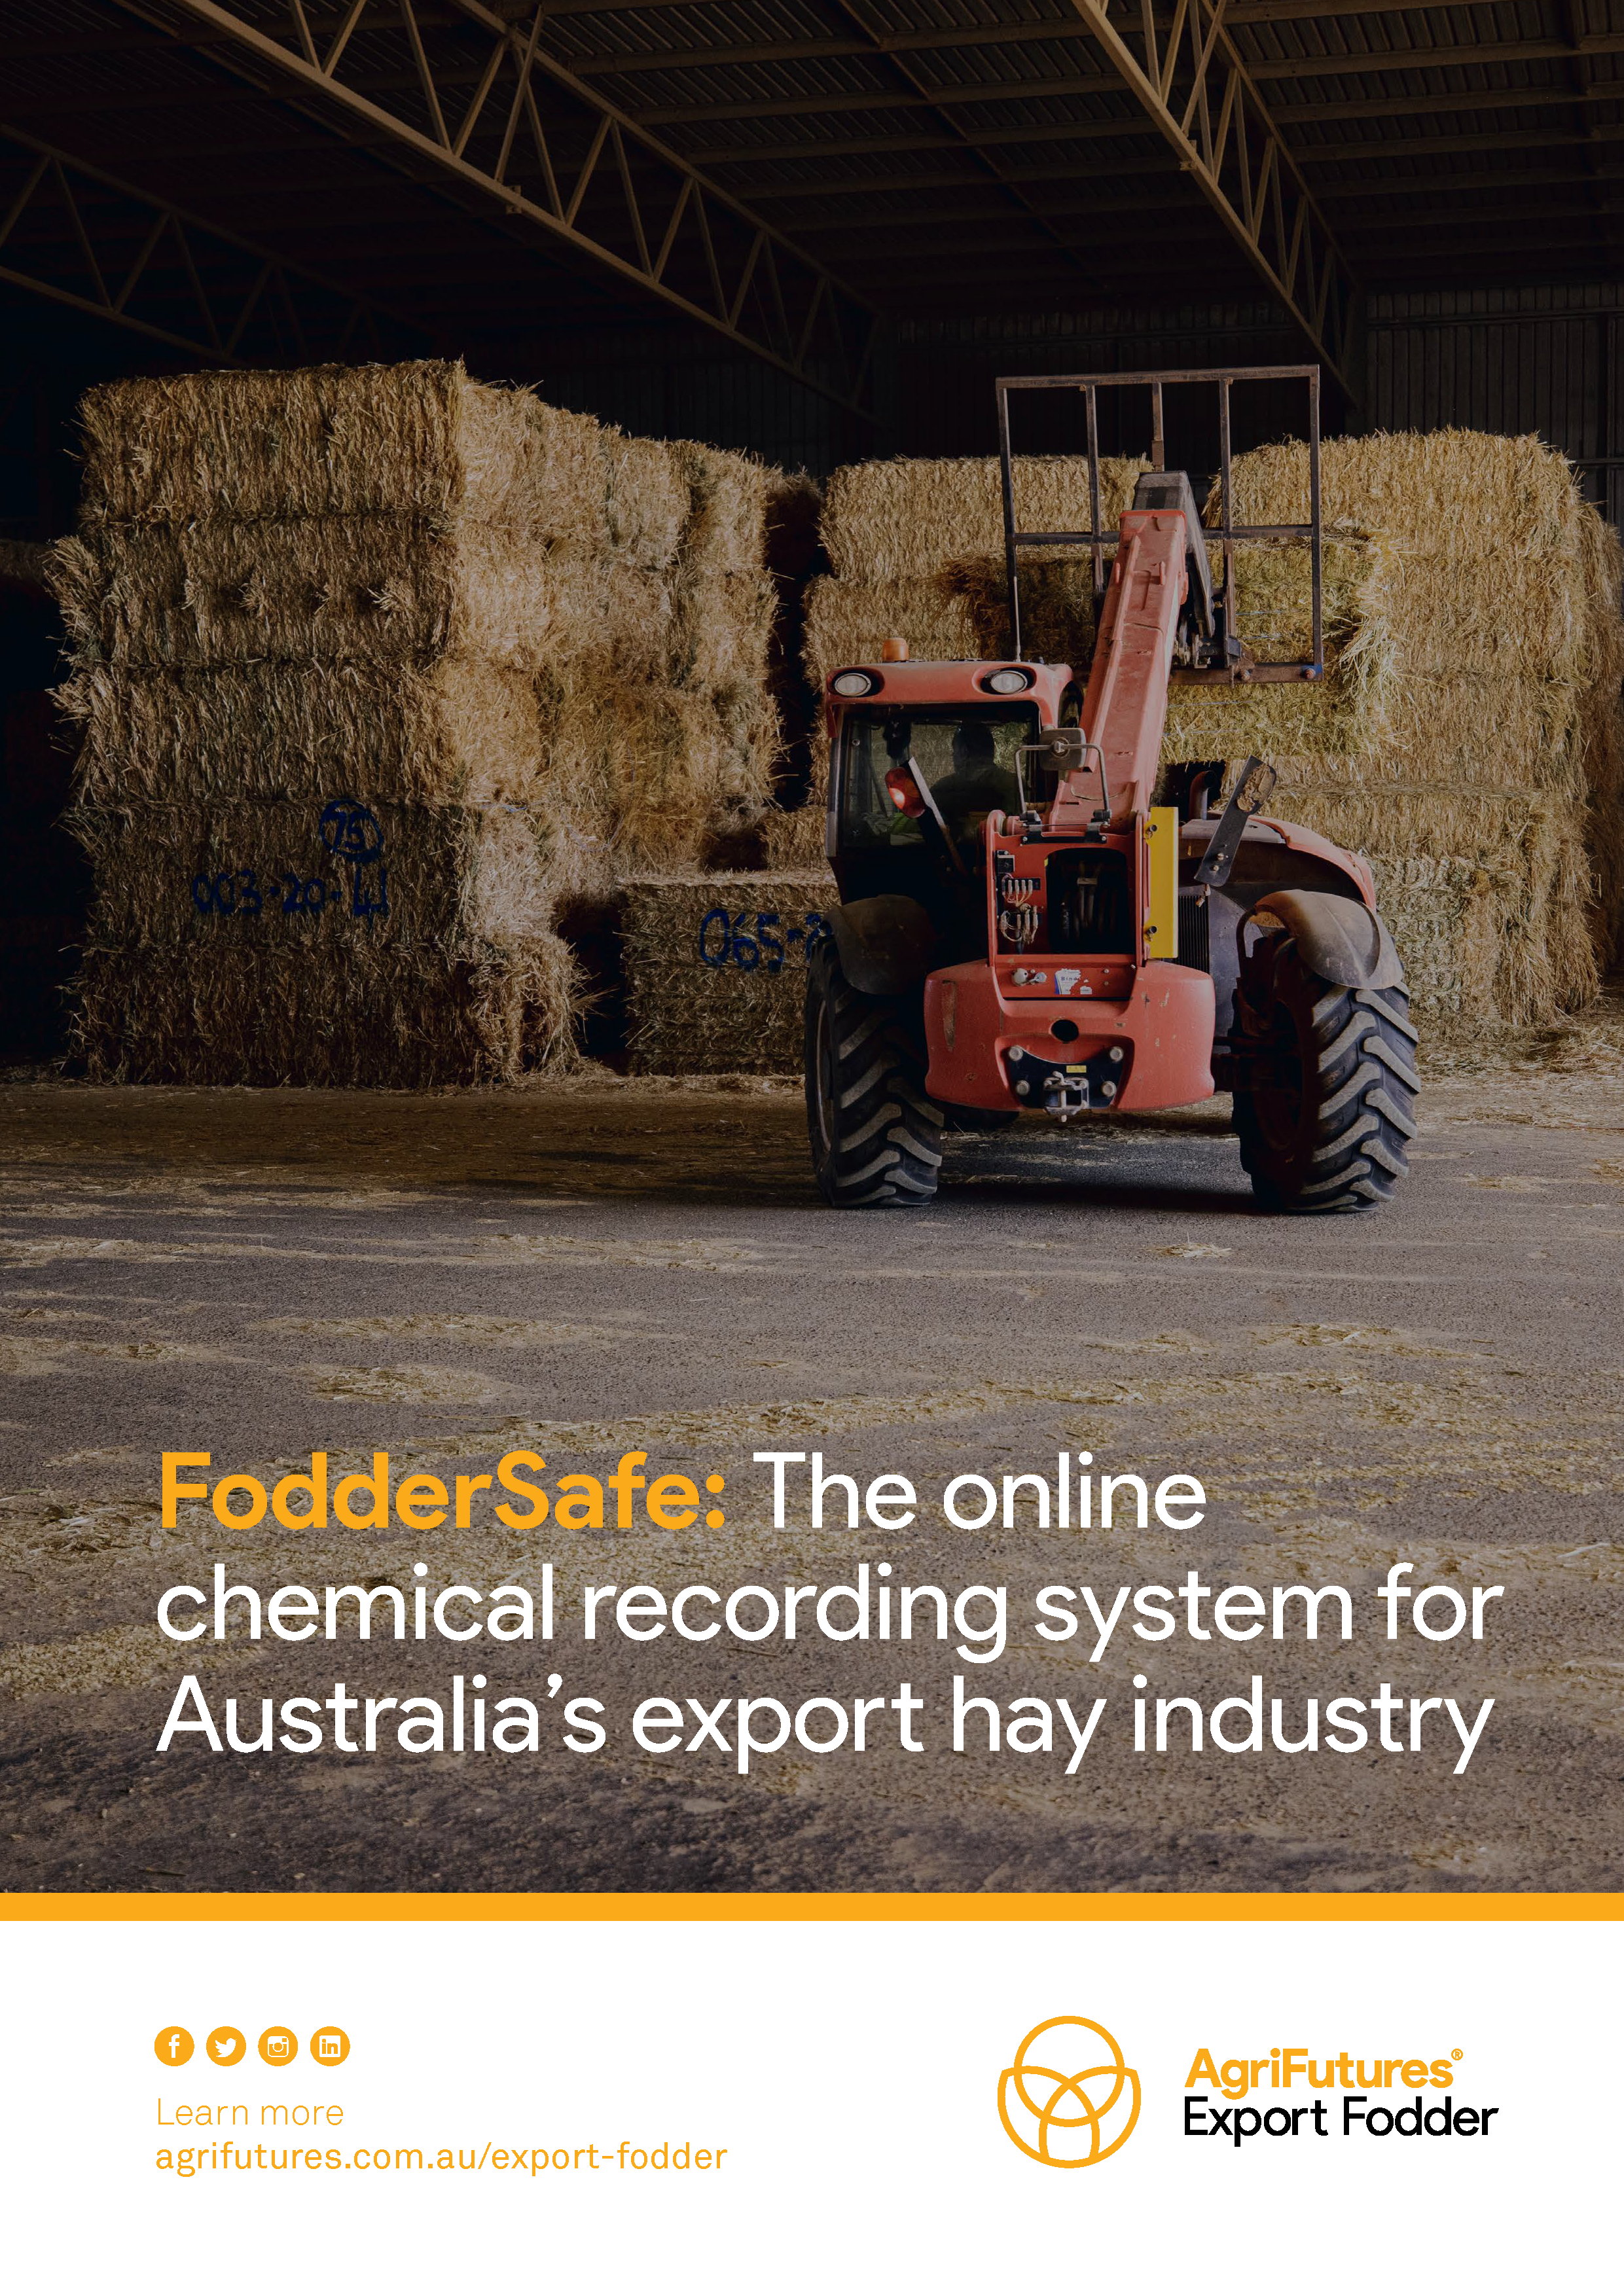 FodderSafe: The online chemical recording system for Australia's export hay industry - image